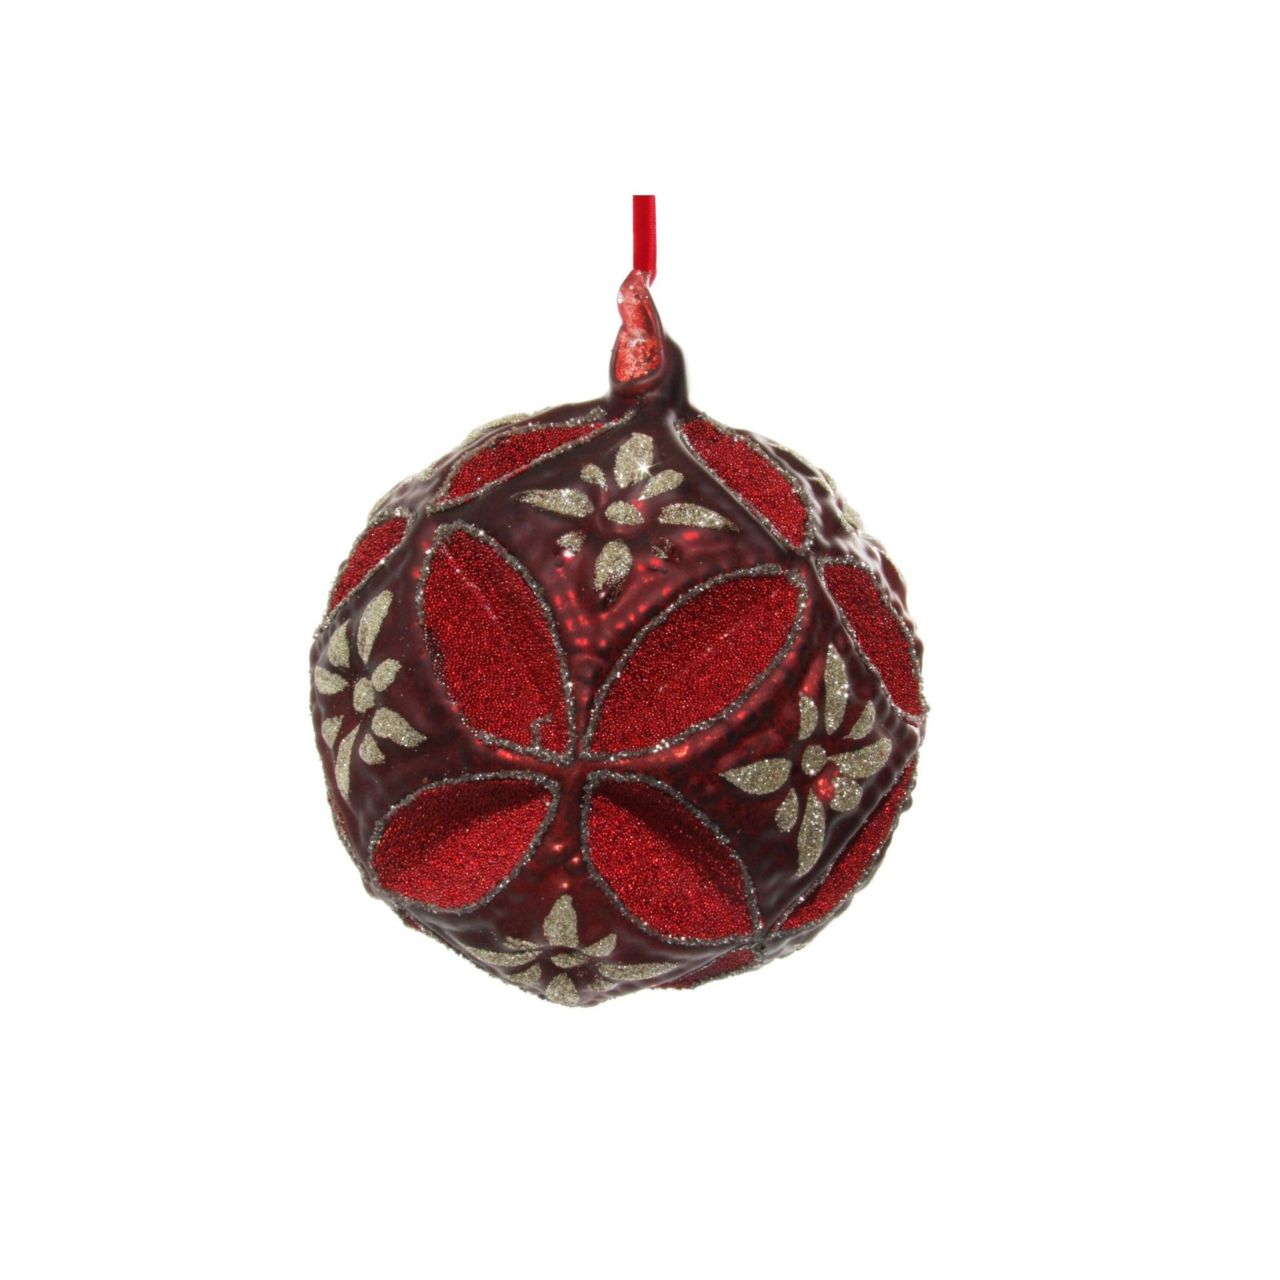 Shishi Red Glass Floral Jewel Ball with Glitter Large  Browse our beautiful range of luxury festive Christmas tree decorations, baubles & ornaments for your tree this Christmas.